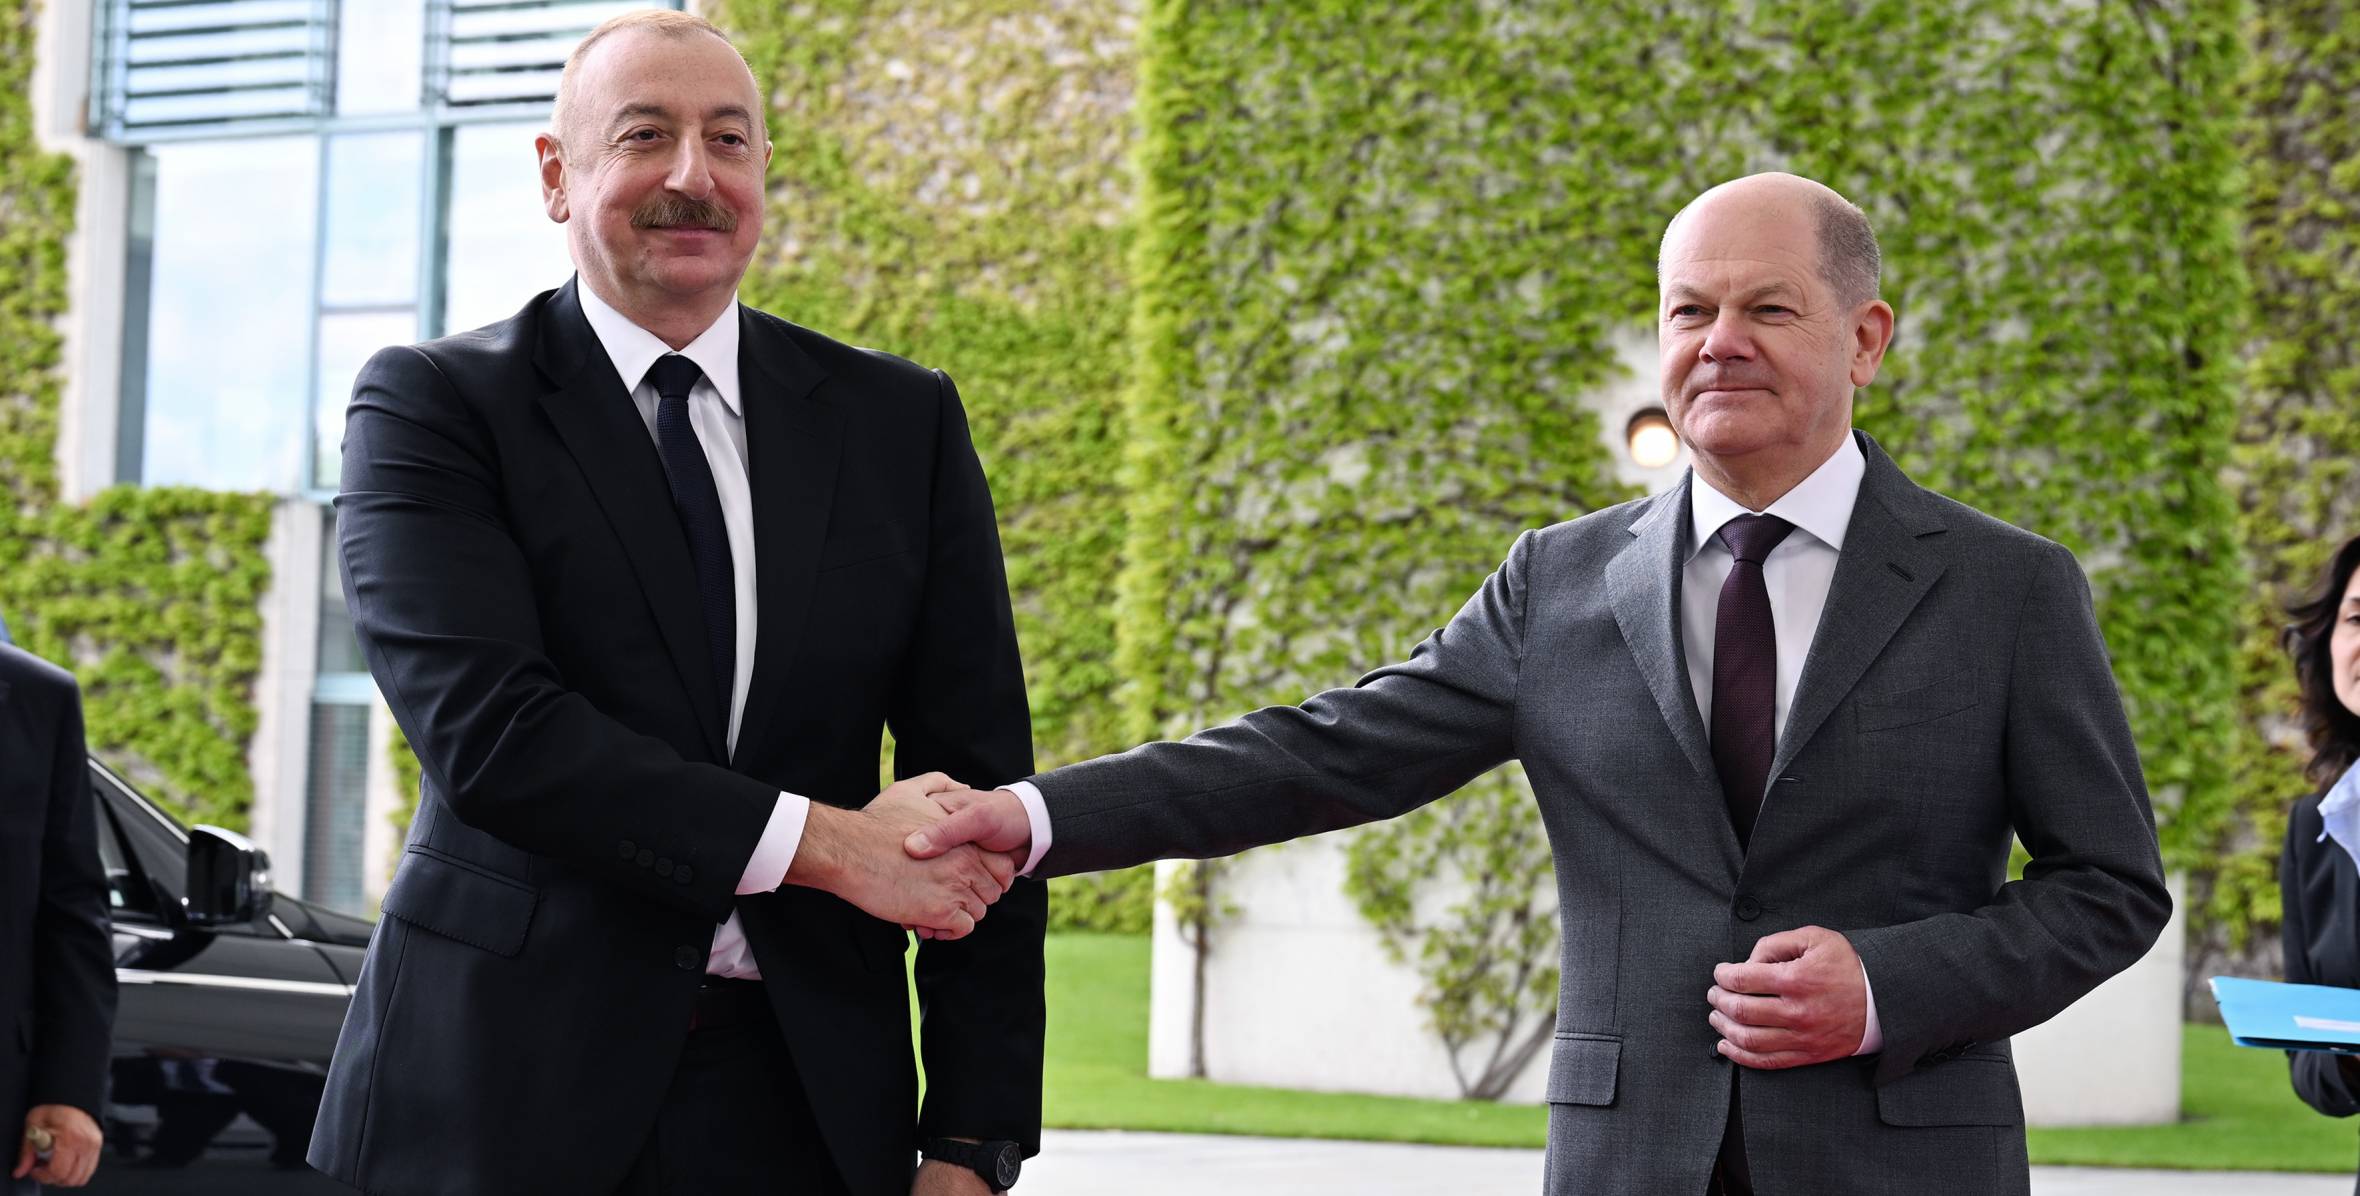 Ilham Aliyev held one-on-one meeting with Chancellor of Germany Olaf Scholz in Berlin